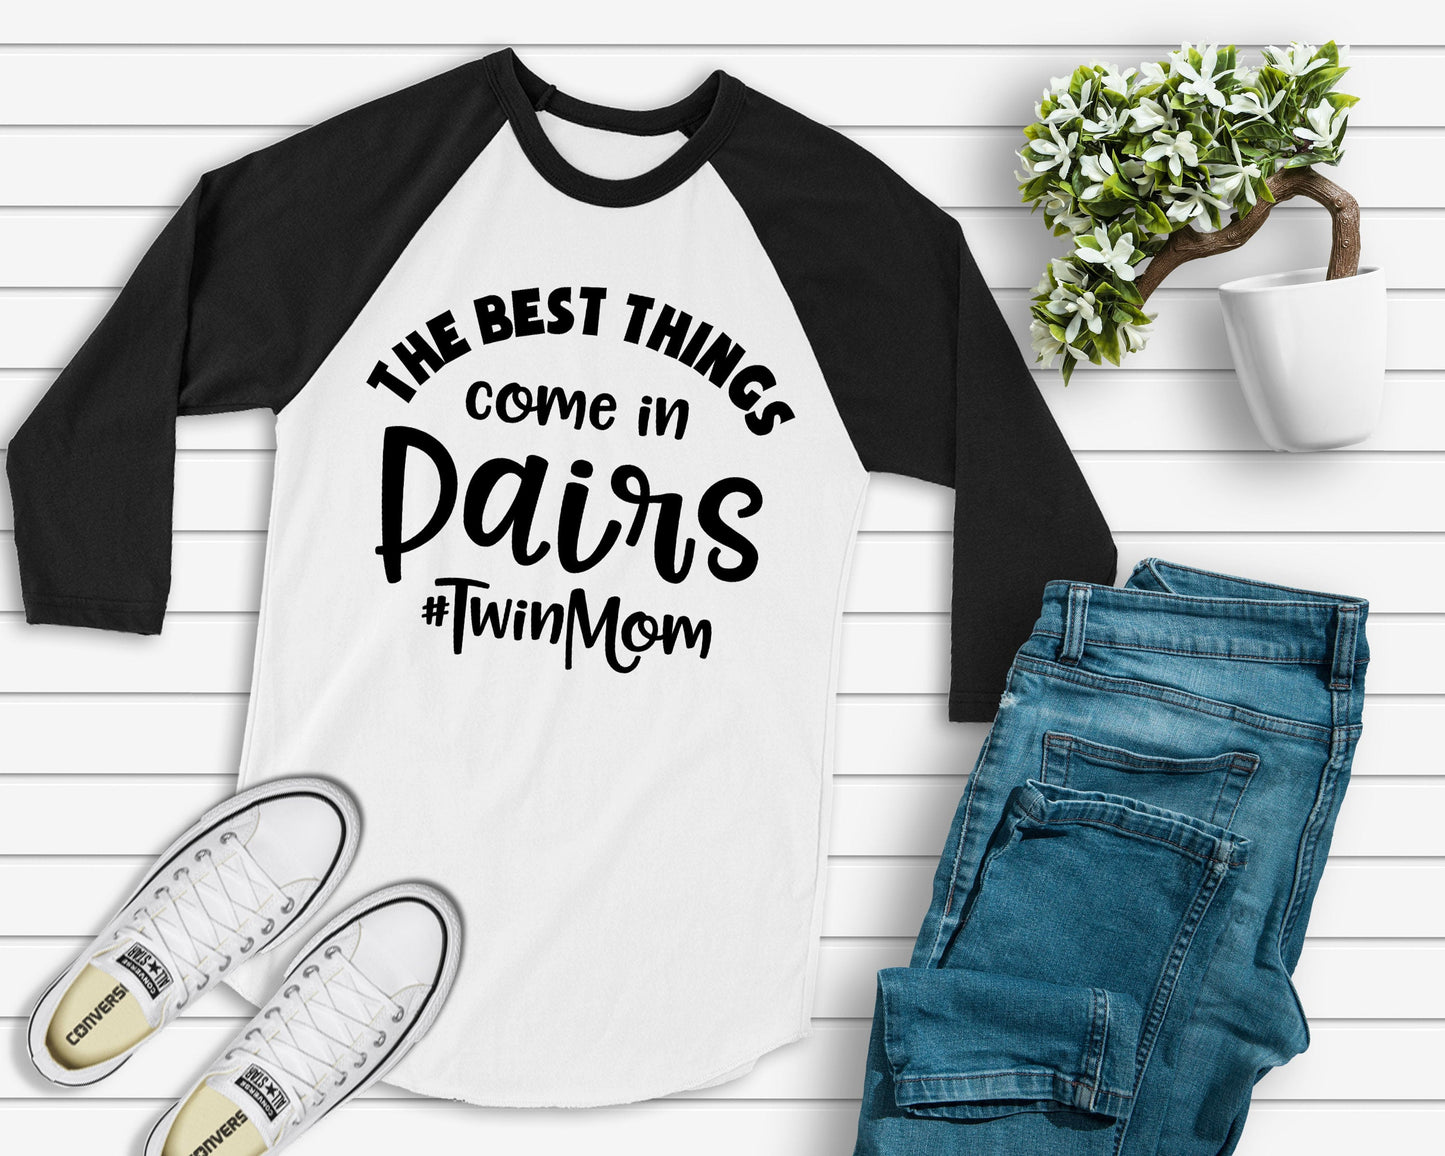 the best things come in pairs #twinmom raglan t-shirt - twin mom shirt - mom of twins shirt - identical twins - fraternal twins